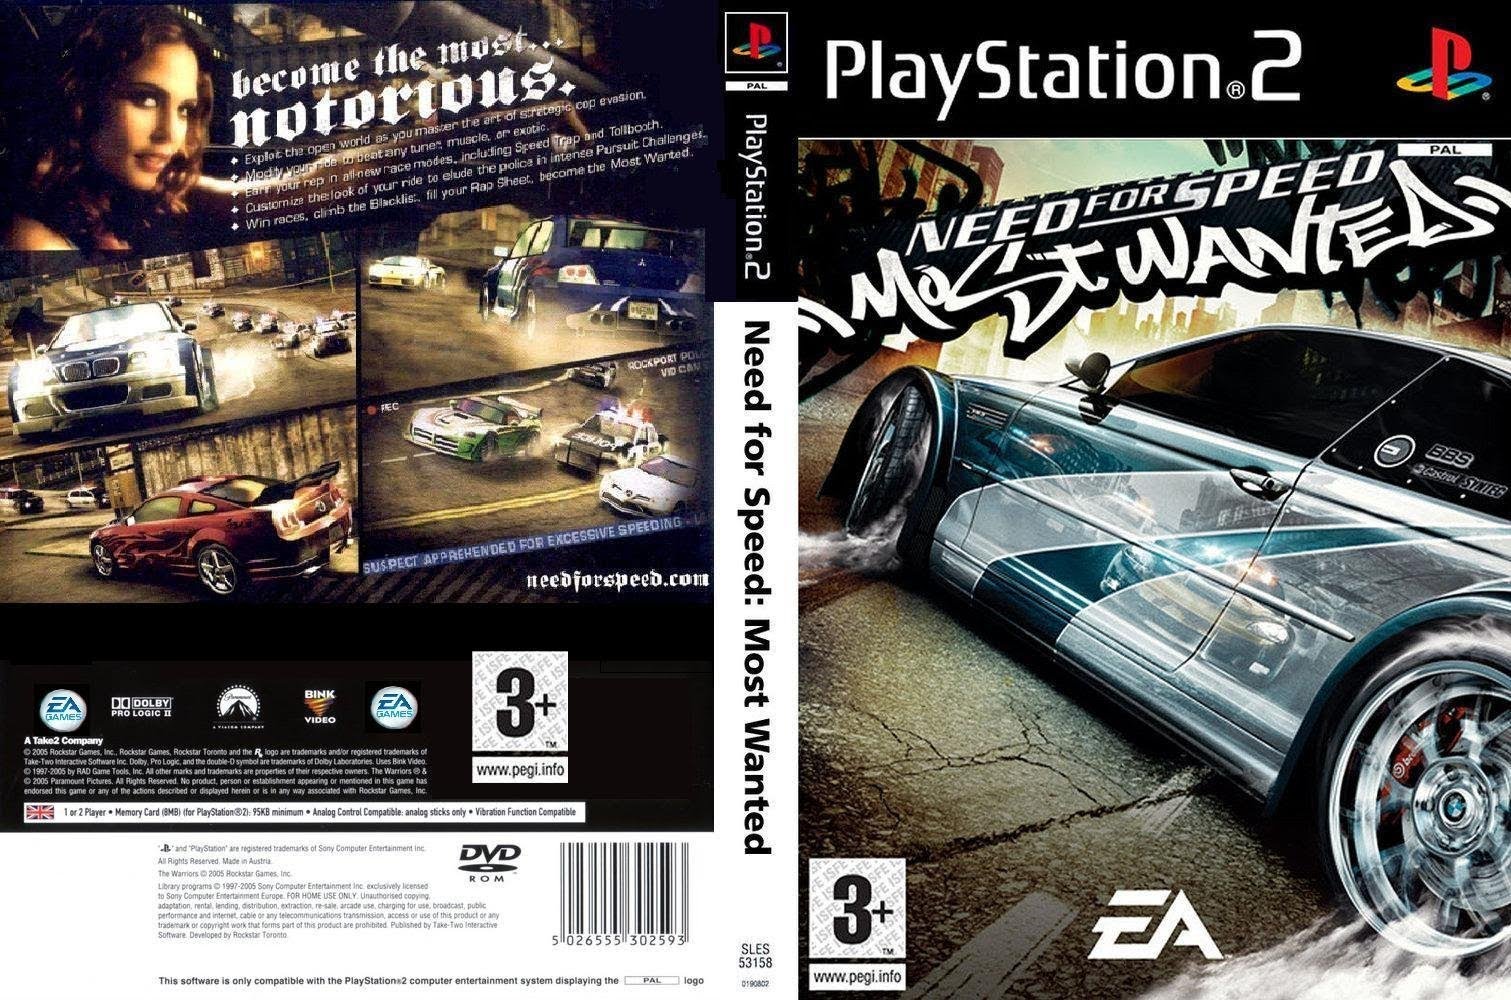 need for speed most wanted ps2 not working with controller